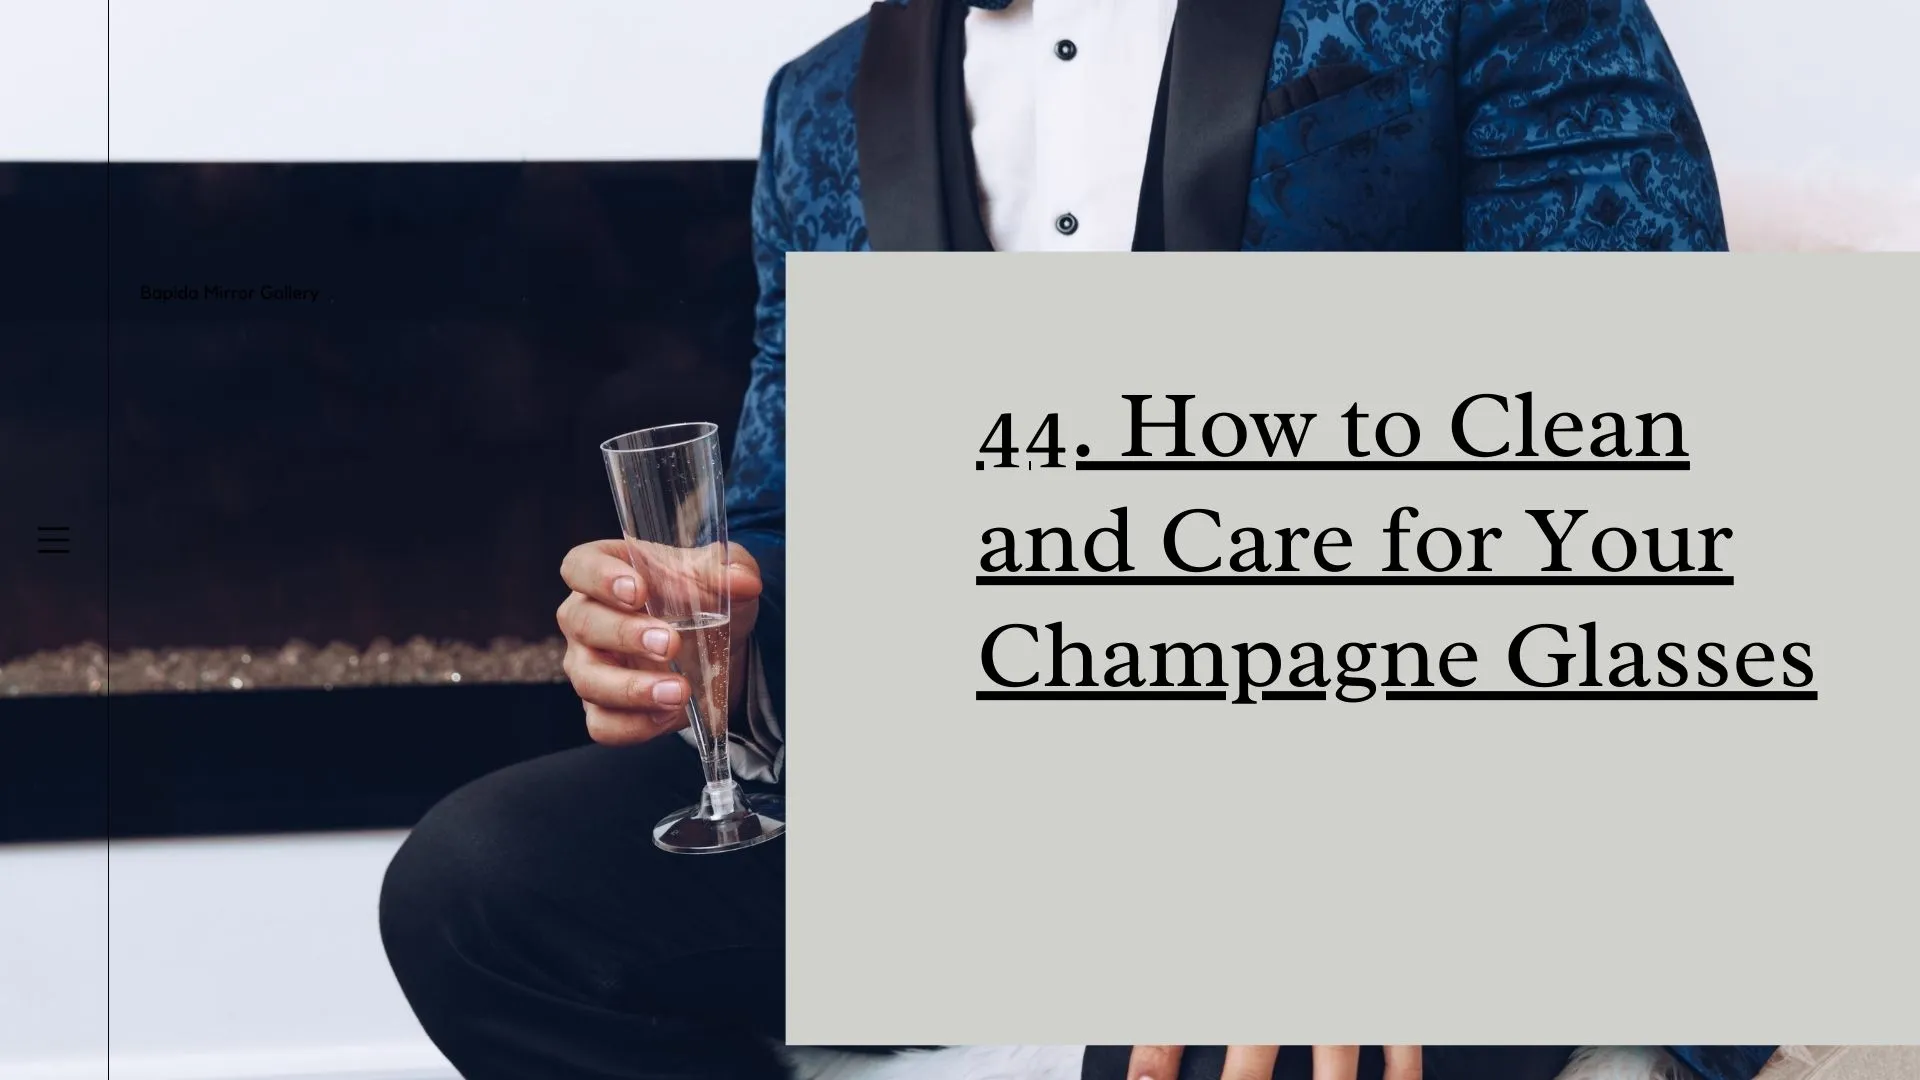 44. How to Clean and Care for Your Champagne Glasses